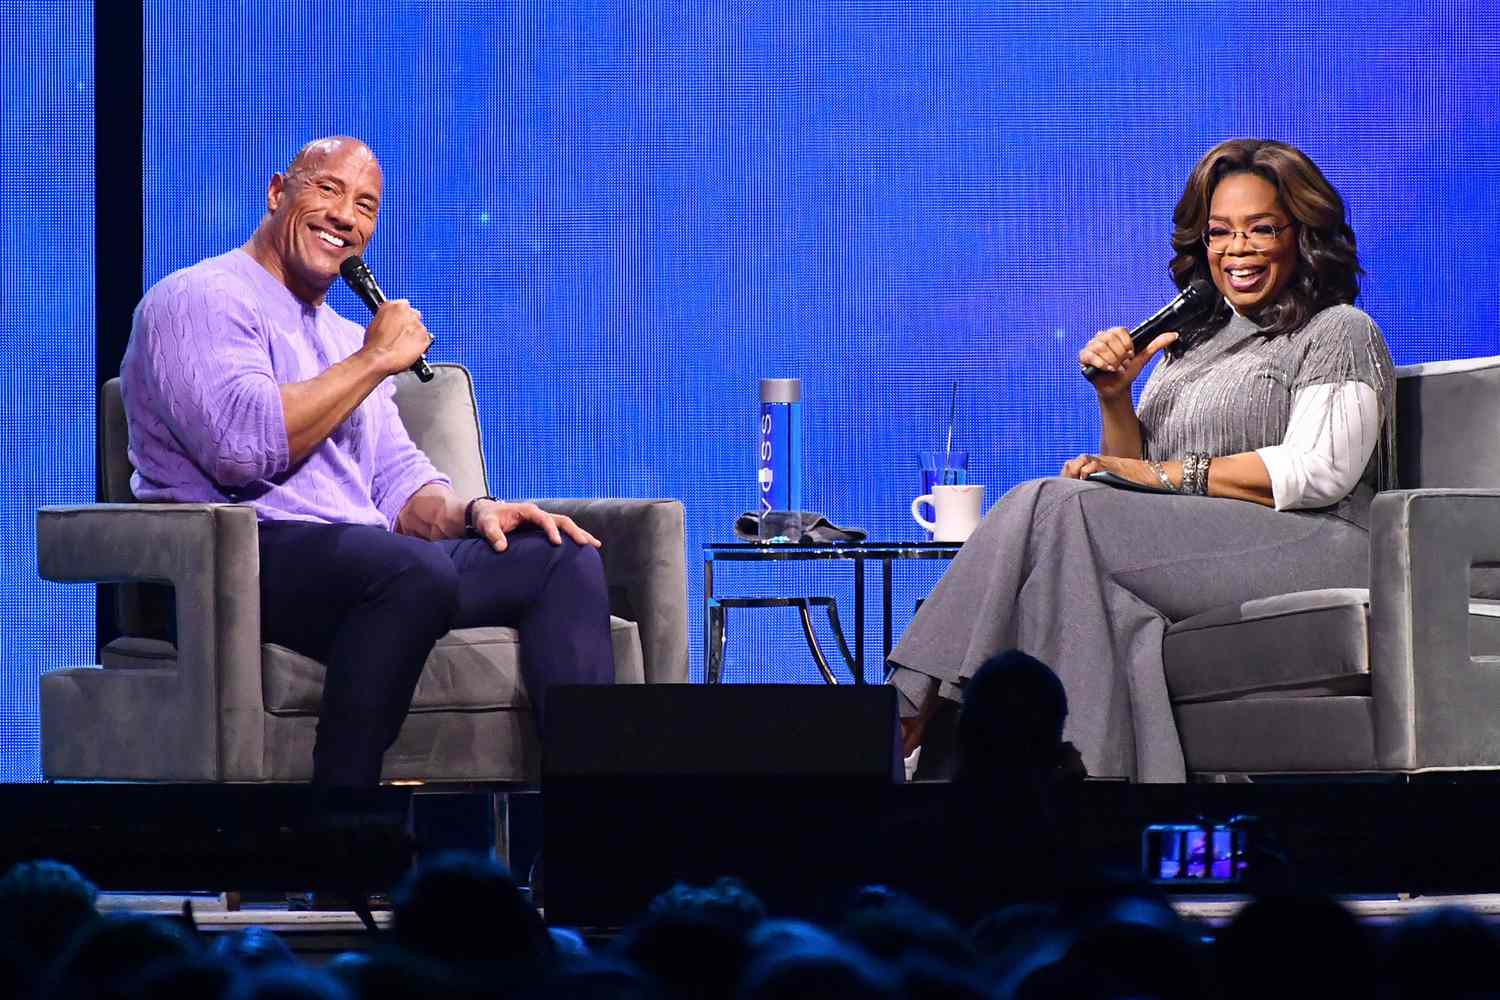 Oprah's 2020 Vision: Your Life In Focus Tour With Special Guest Dwayne Johnson